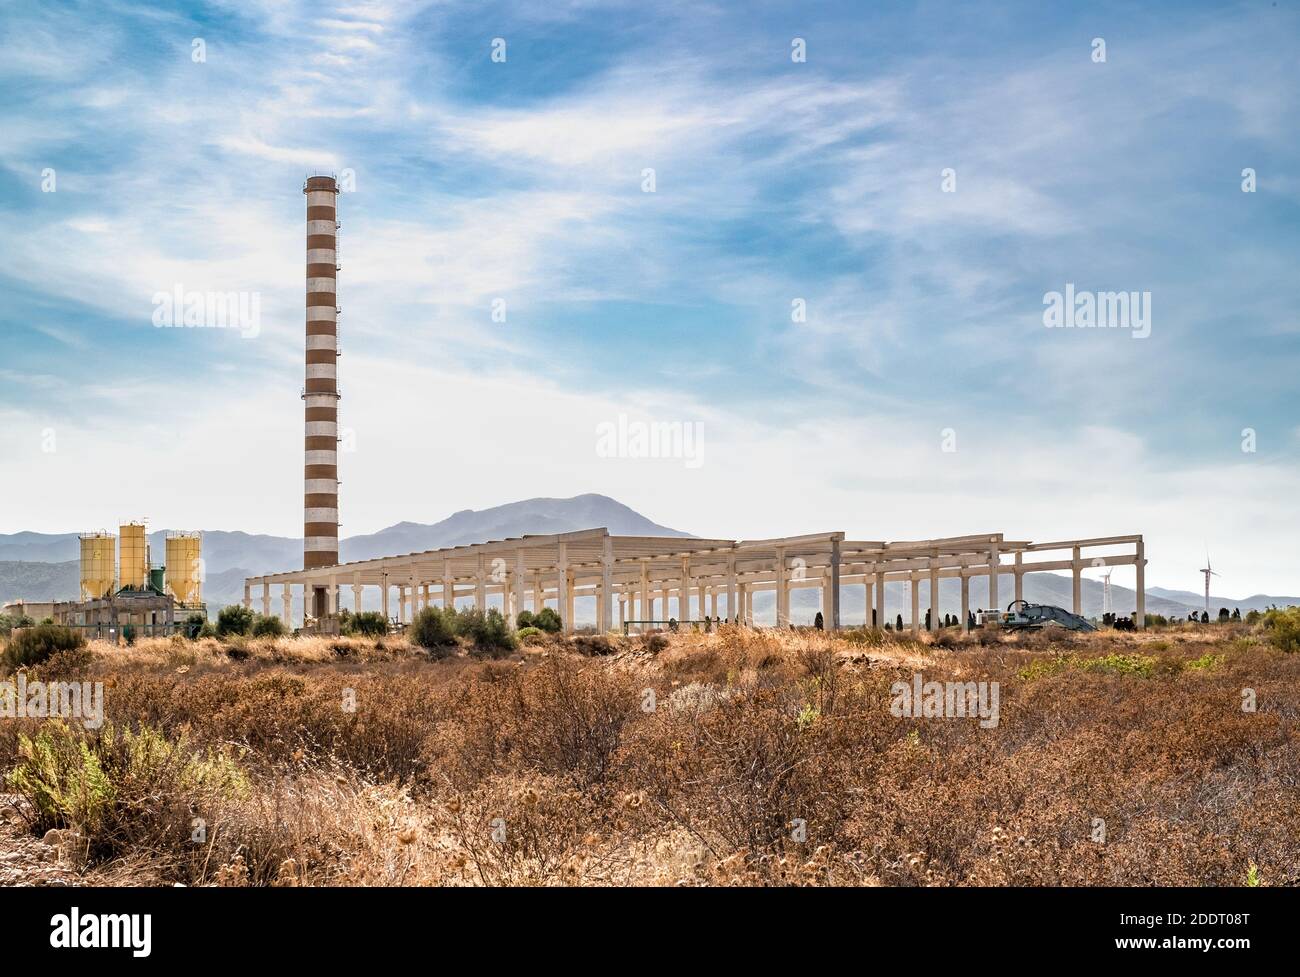 Huge unfinished industrial plant near Cagliari, Sardinia, Italy. Stock Photo